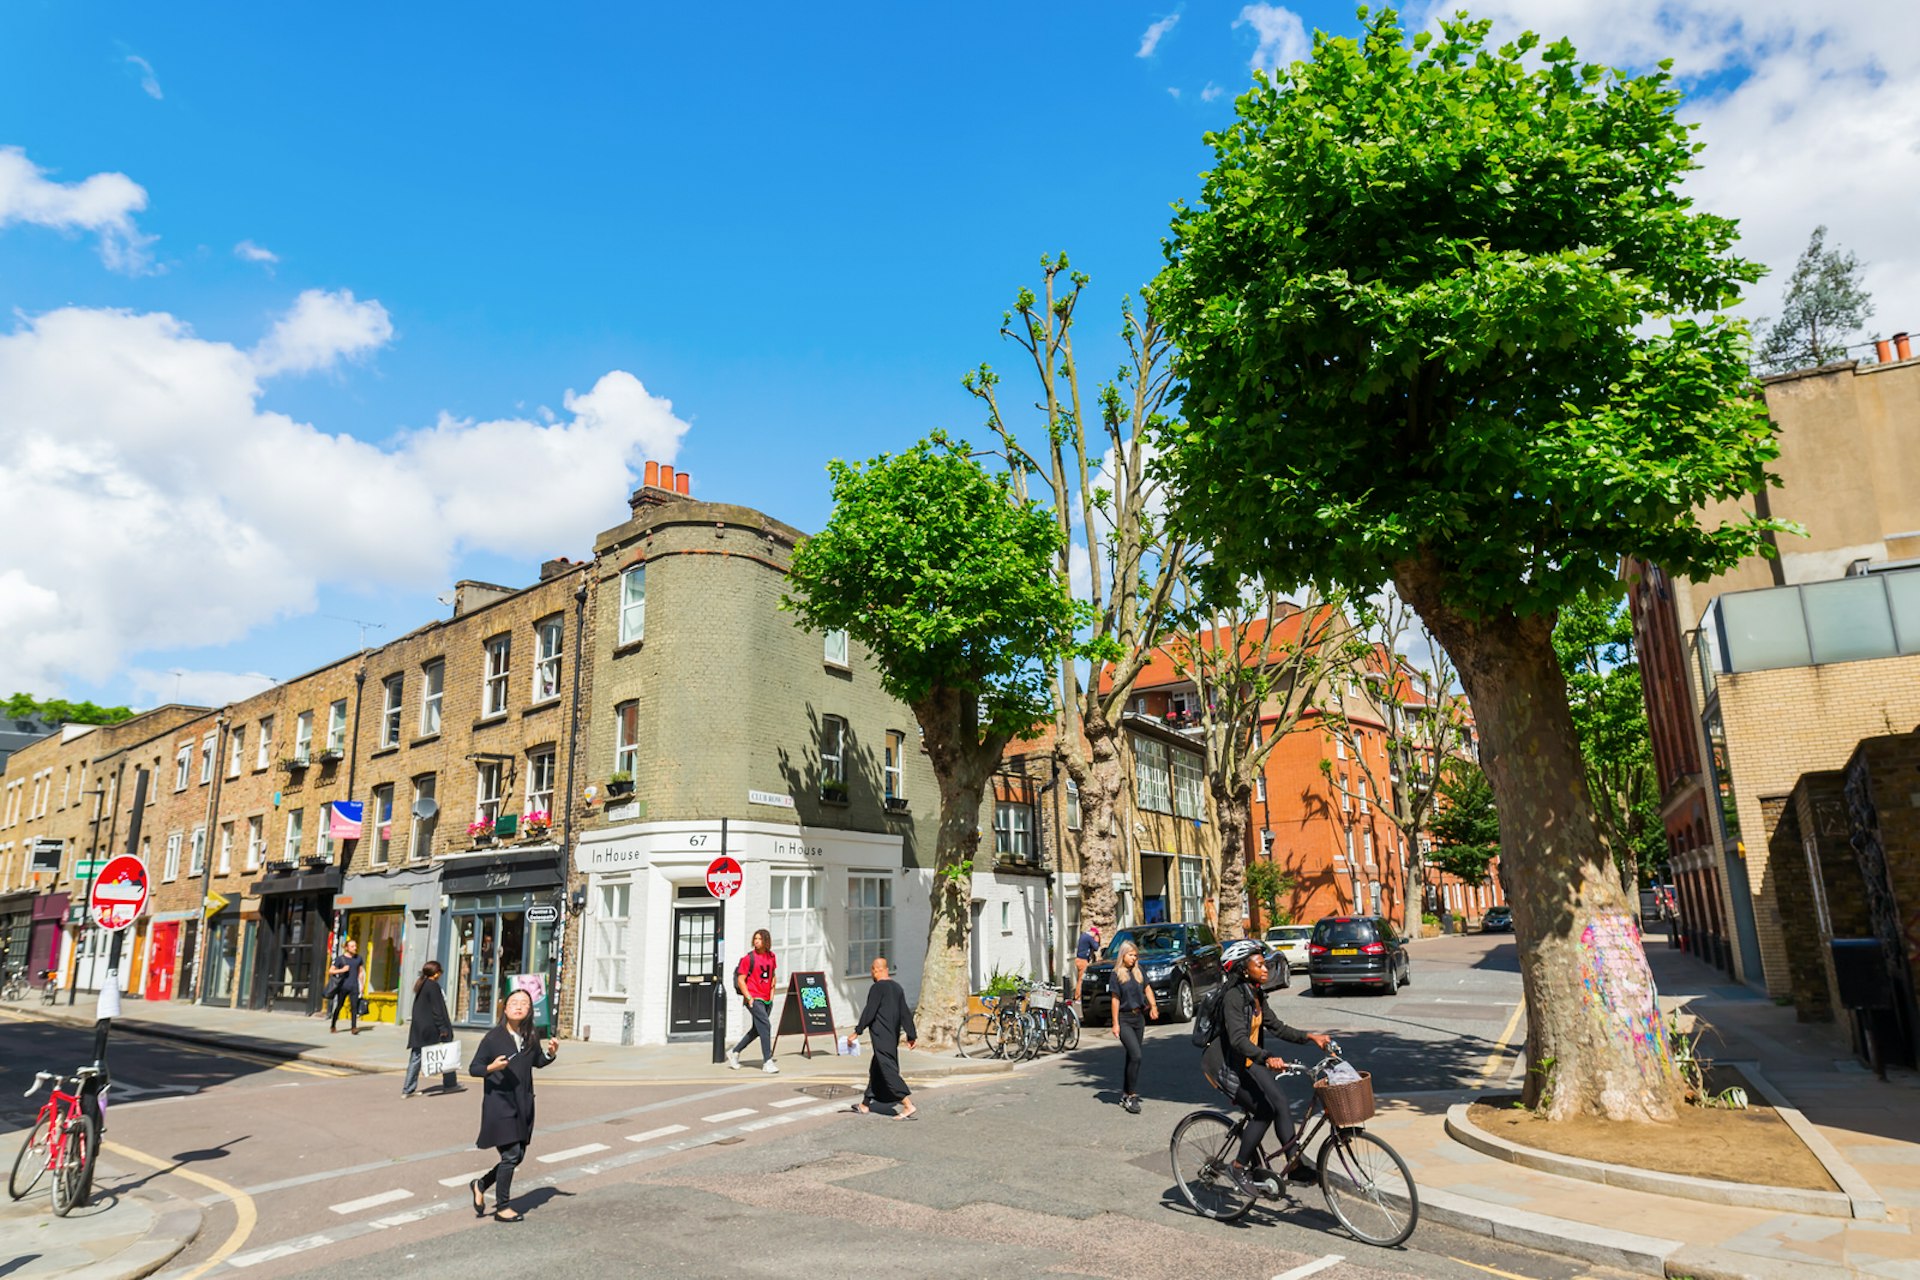 Strolling along Redchurch St in Shoreditch, home to the Boundary © Christian Mueller / Shutterstock